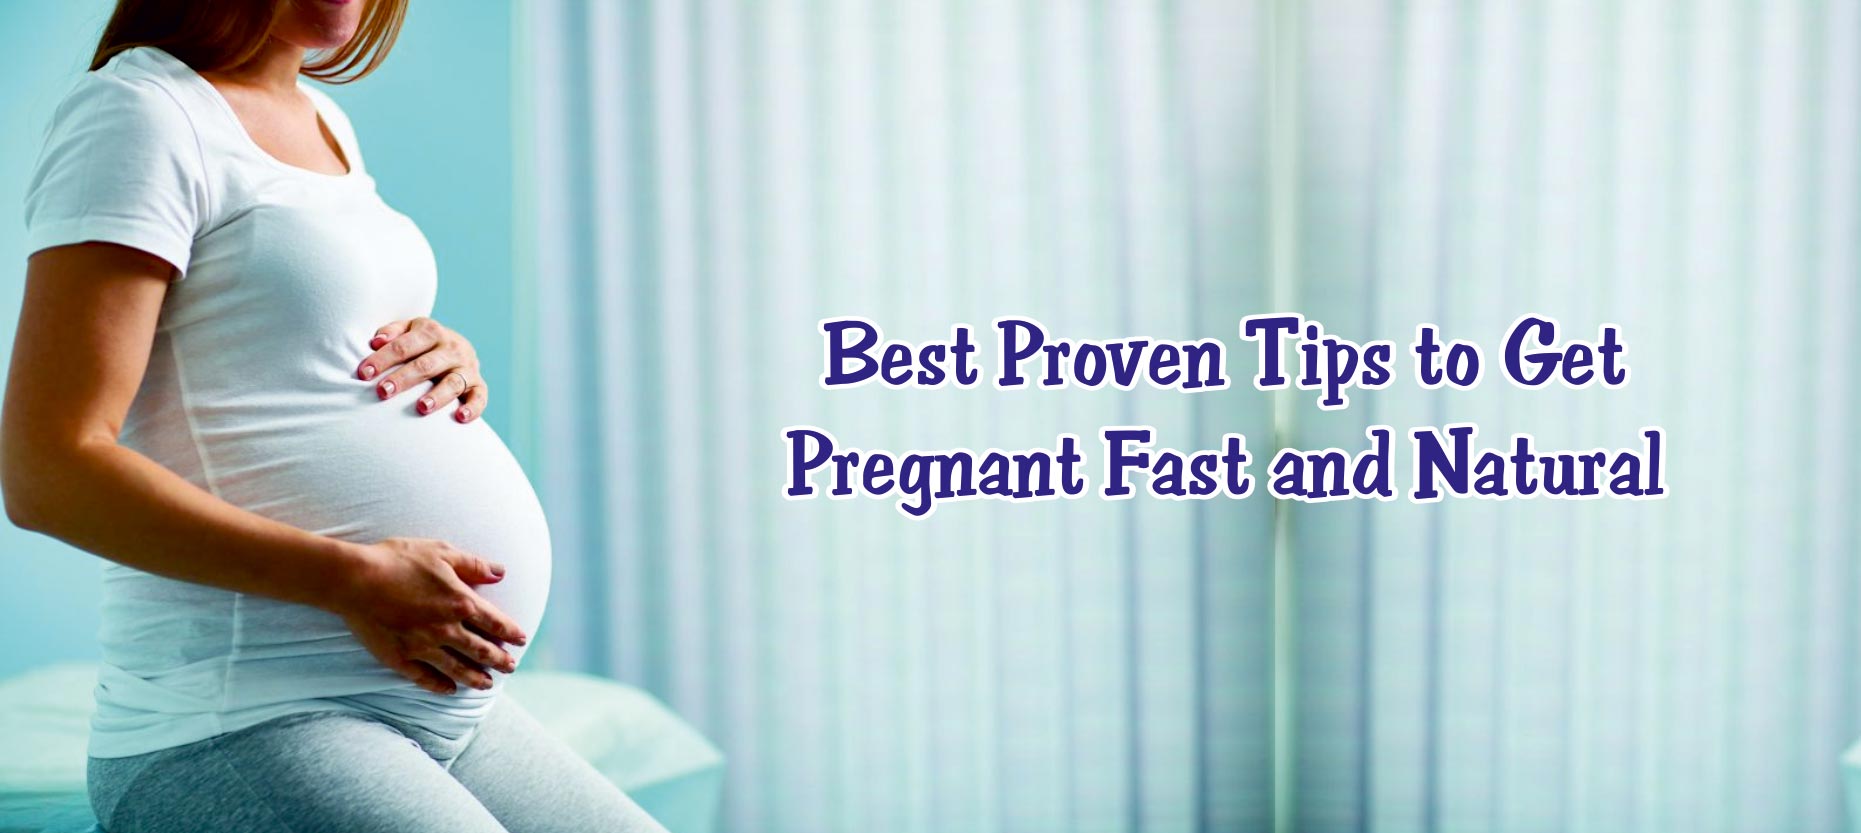 Best Proven Tips to Get Pregnant Fast and Natural